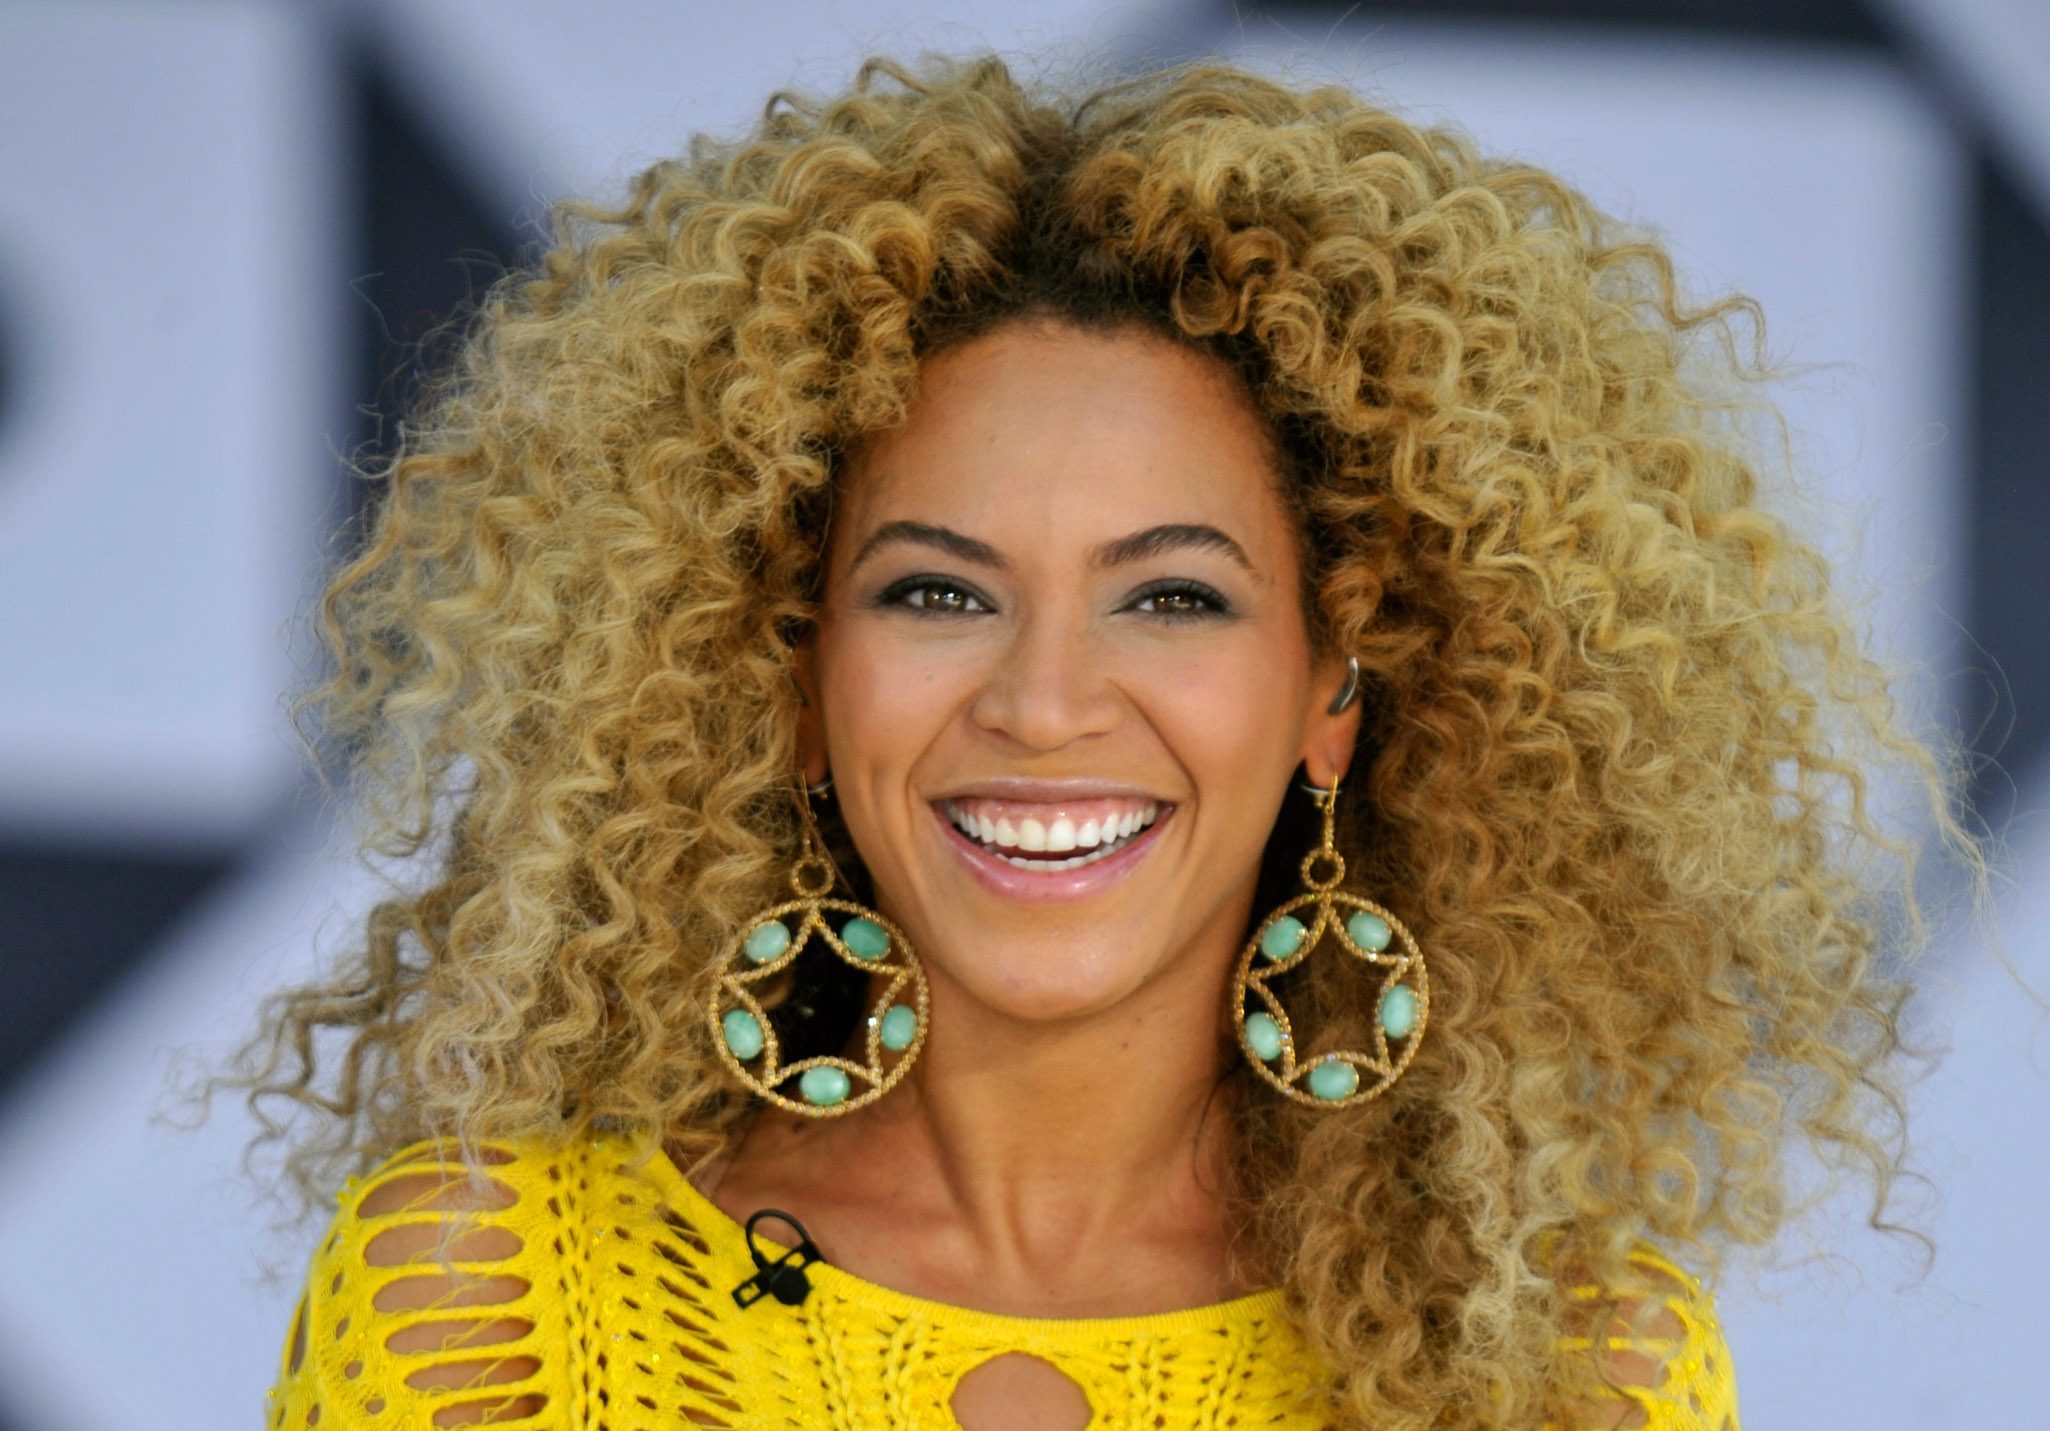 Beyonce anniversary Performs On ABC's 'Good Morning America'